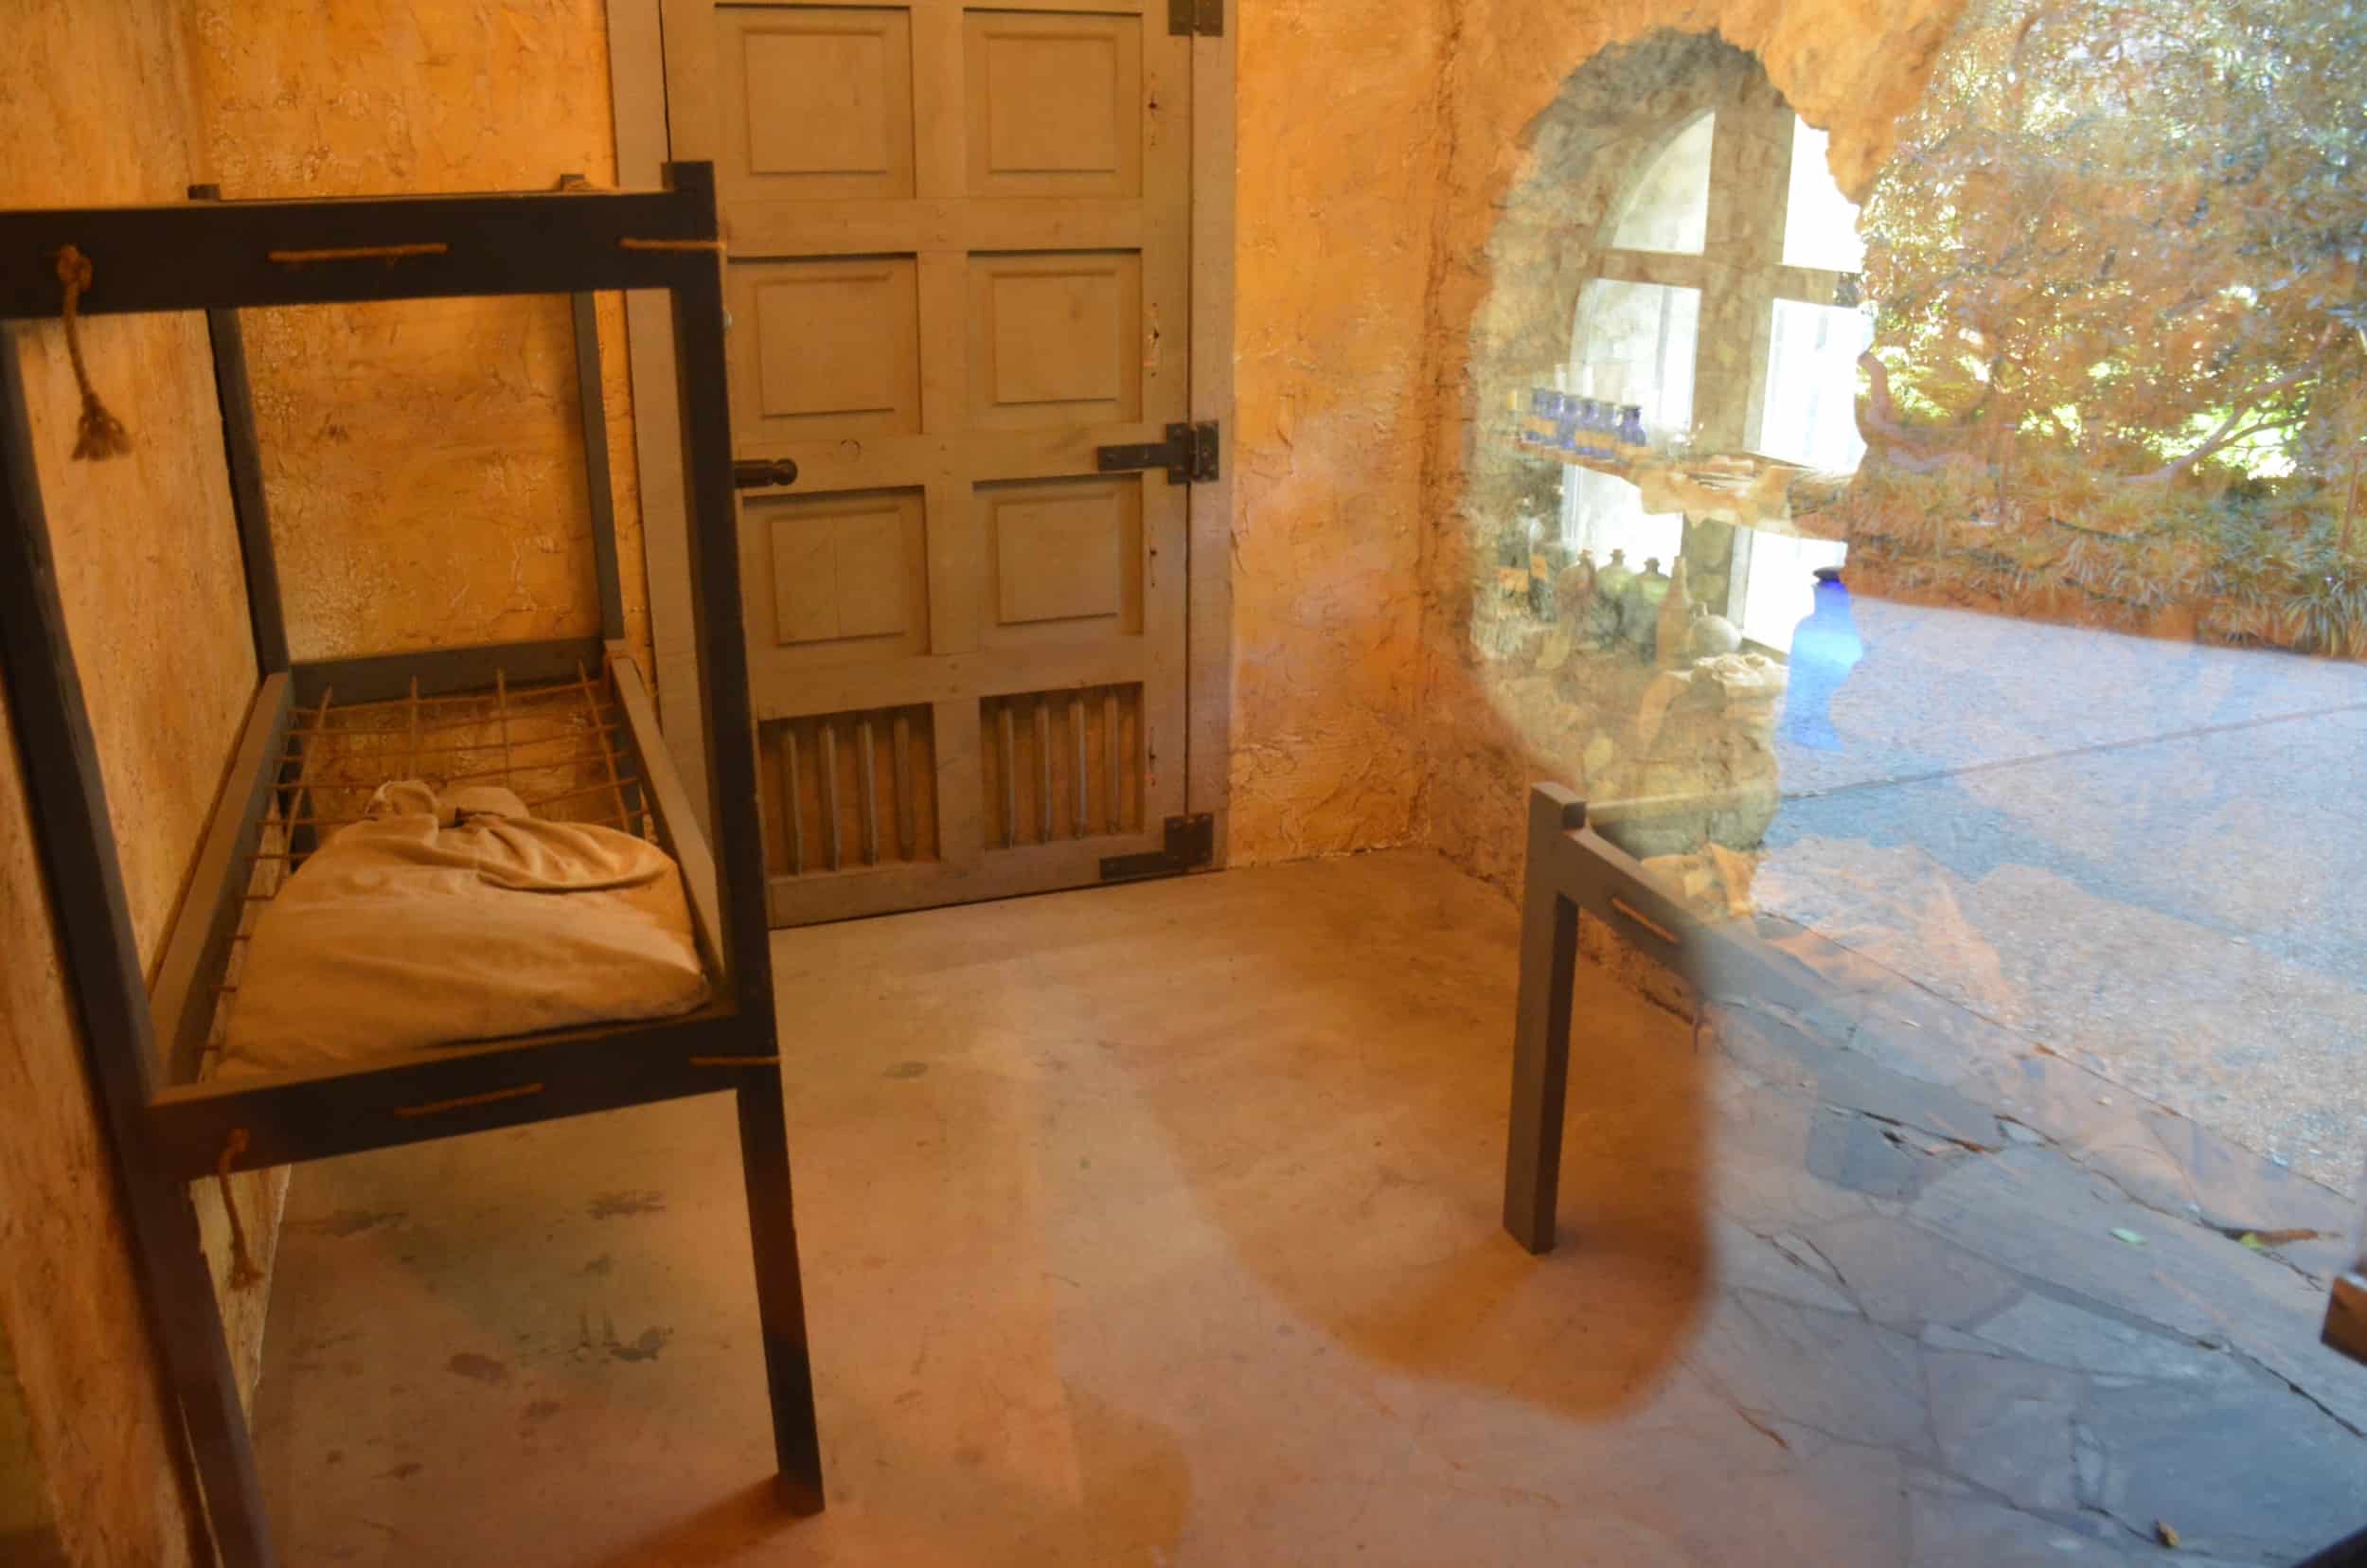 Replica Spanish hospital room at the Long Barrack (convent)